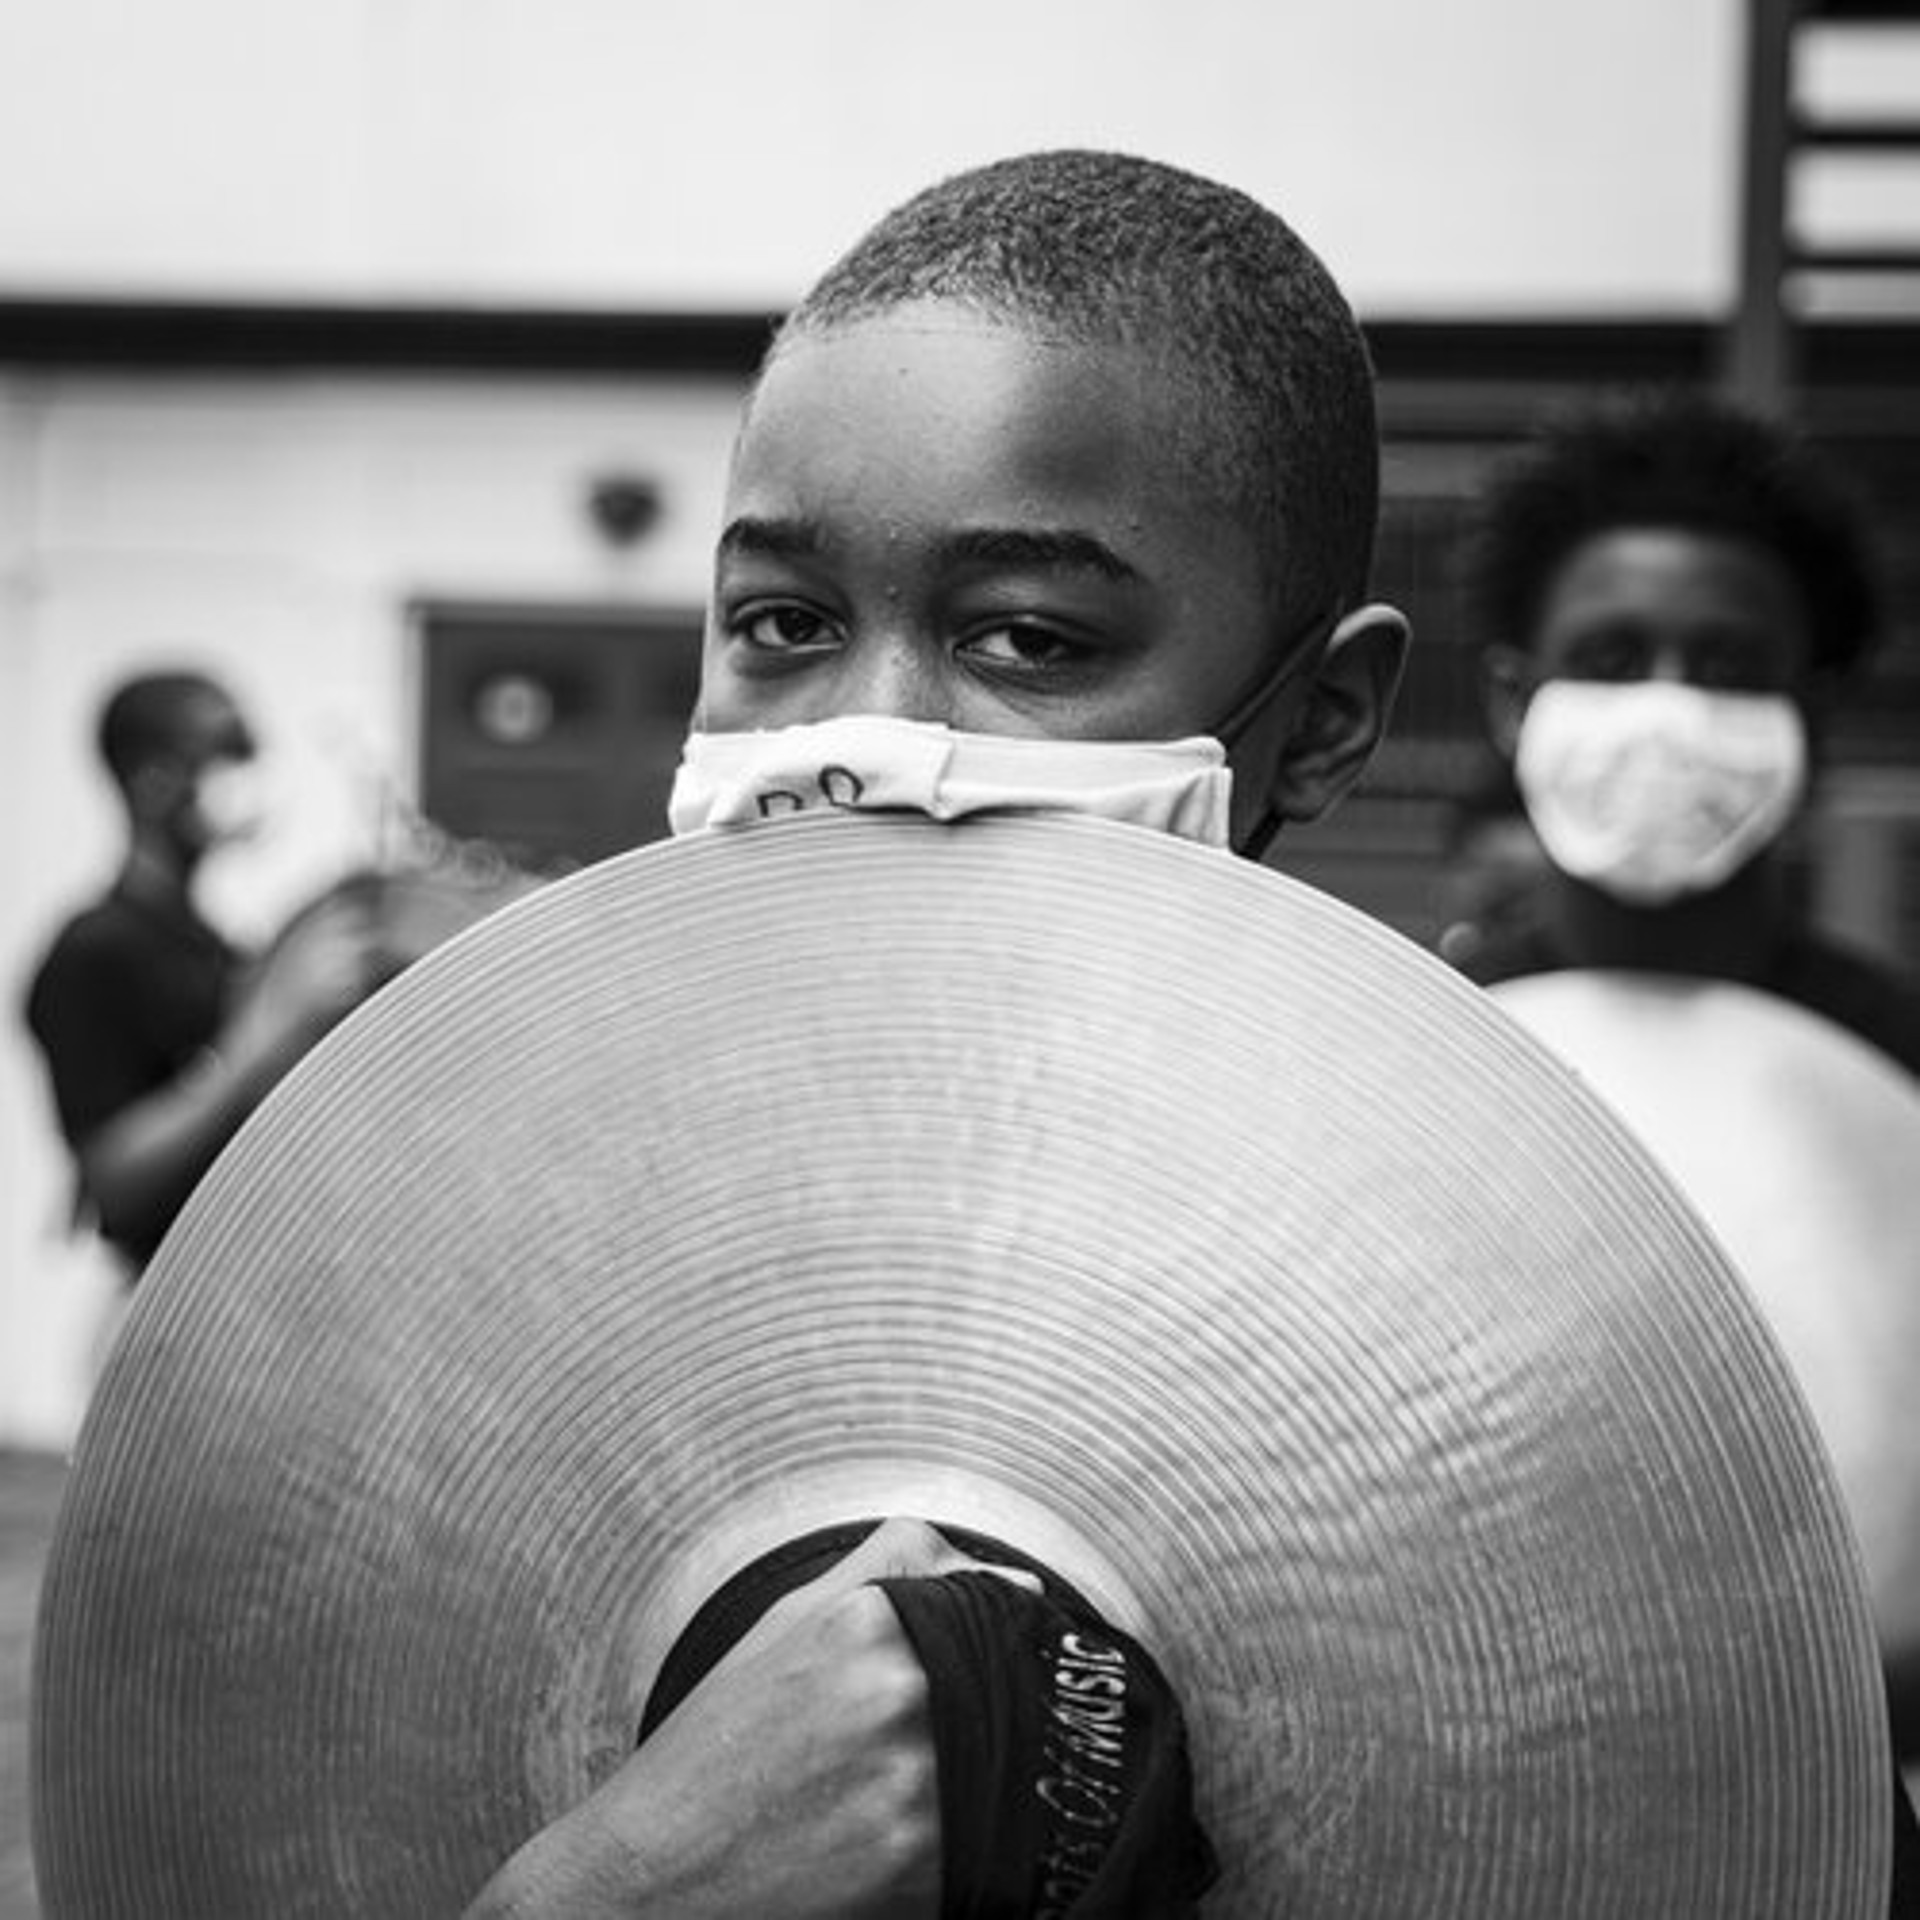 Boy and Cymbal by Kevin Greenblat